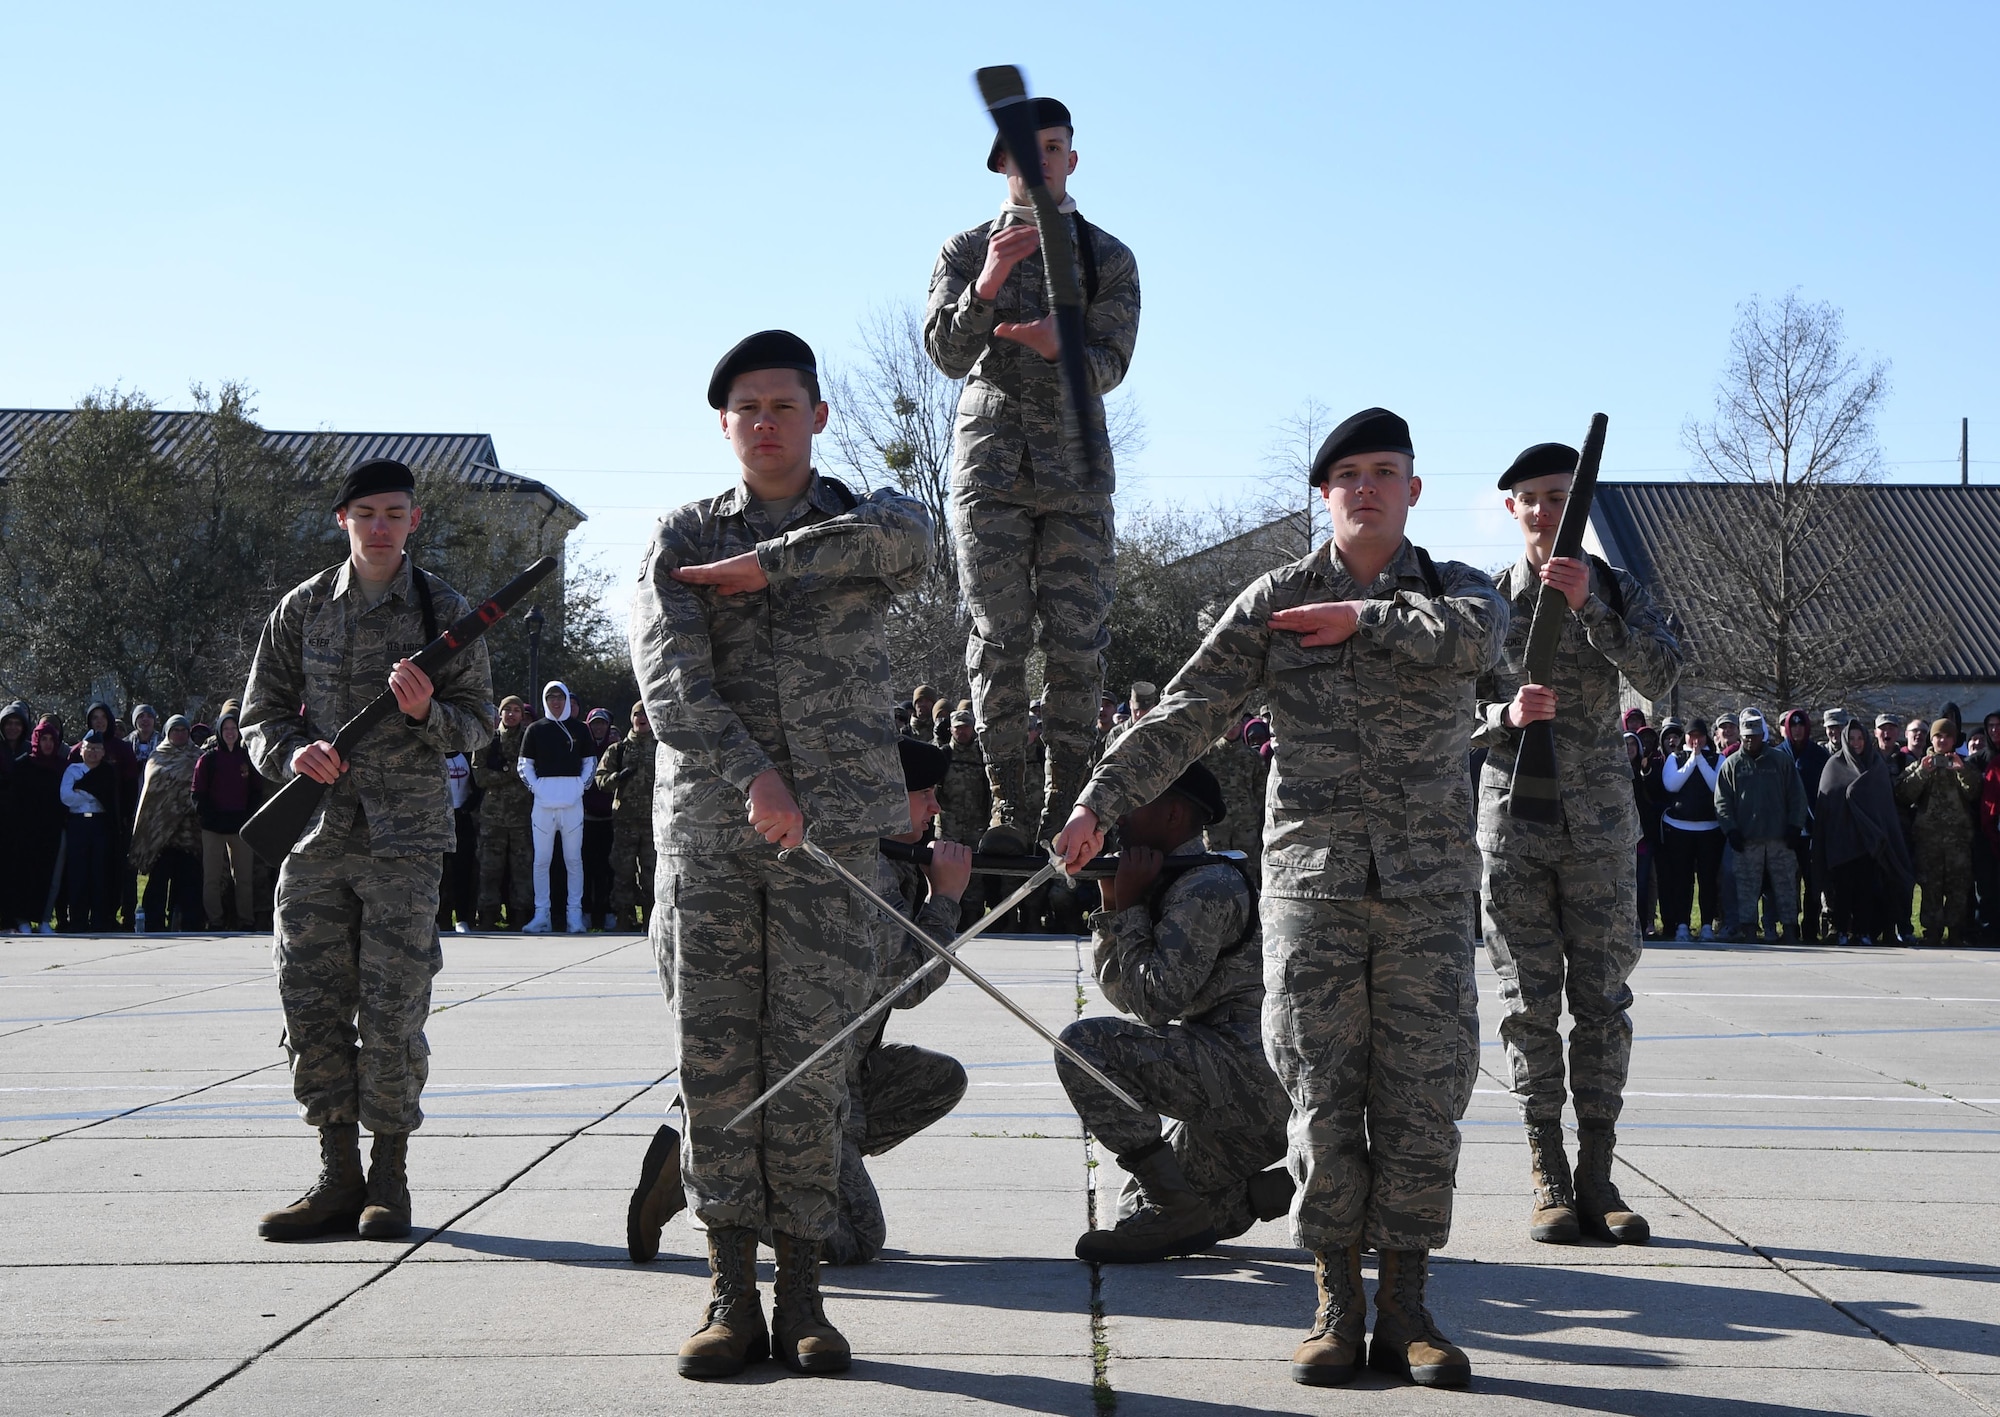 Members of the 338th Training Squadron freestyle drill team perform during the 81st Training Group drill down on the Levitow Training Support Facility drill pad at Keesler Air Force Base, Mississippi, Feb. 21, 2020. Airmen from the 81st TRG competed in a quarterly open ranks inspection, regulation drill routine and freestyle drill routine. Keesler trains more than 30,000 students each year. While in training, Airmen are given the opportunity to volunteer to learn and execute drill down routines. (U.S. Air Force photo by Kemberly Groue)